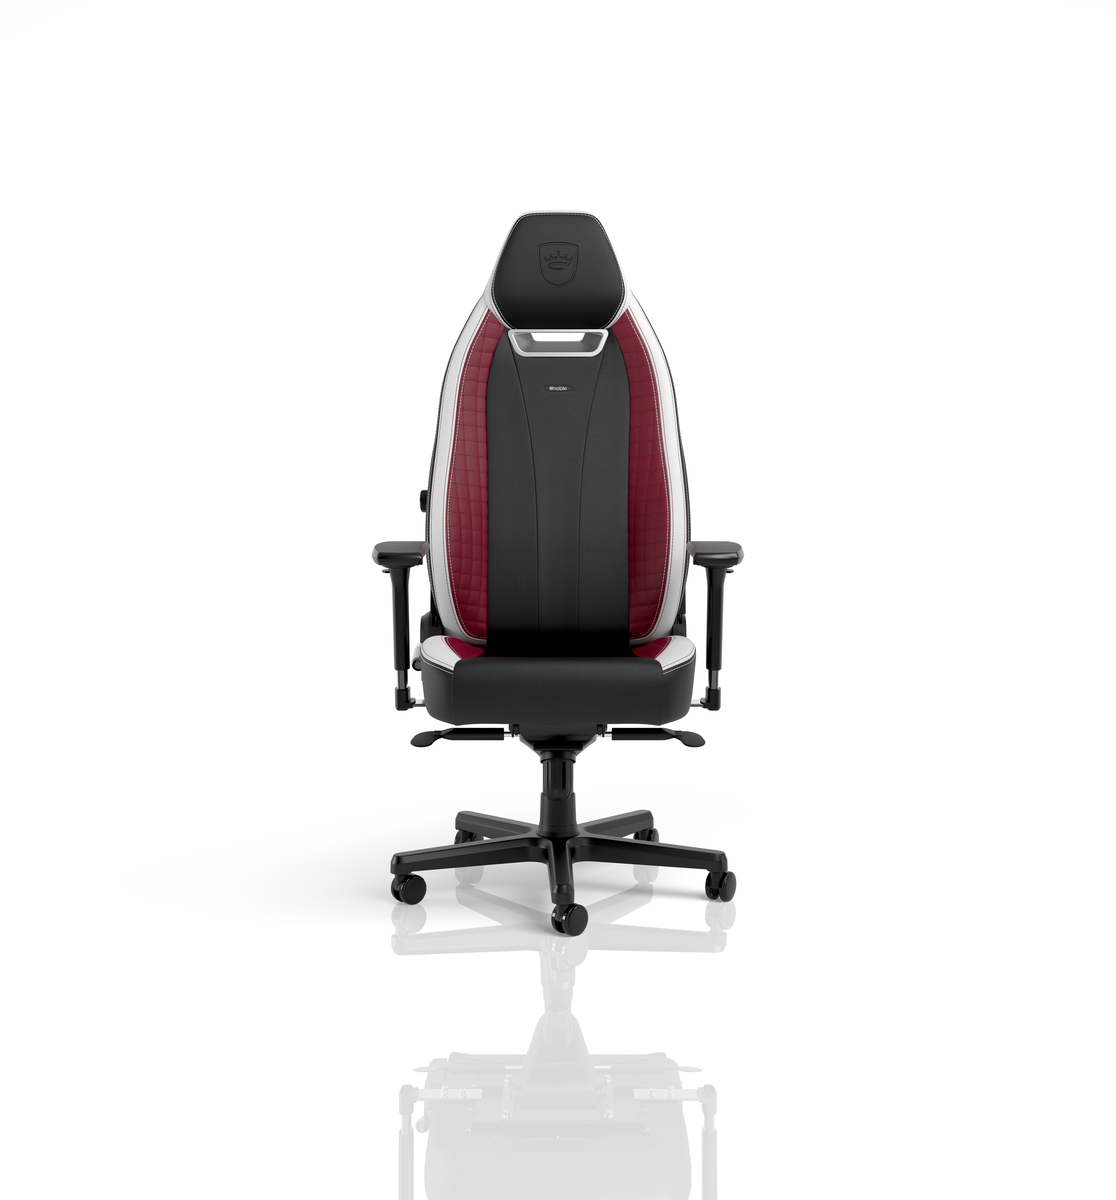 noblechairs LEGEND Gaming Stuhl - black/white/red